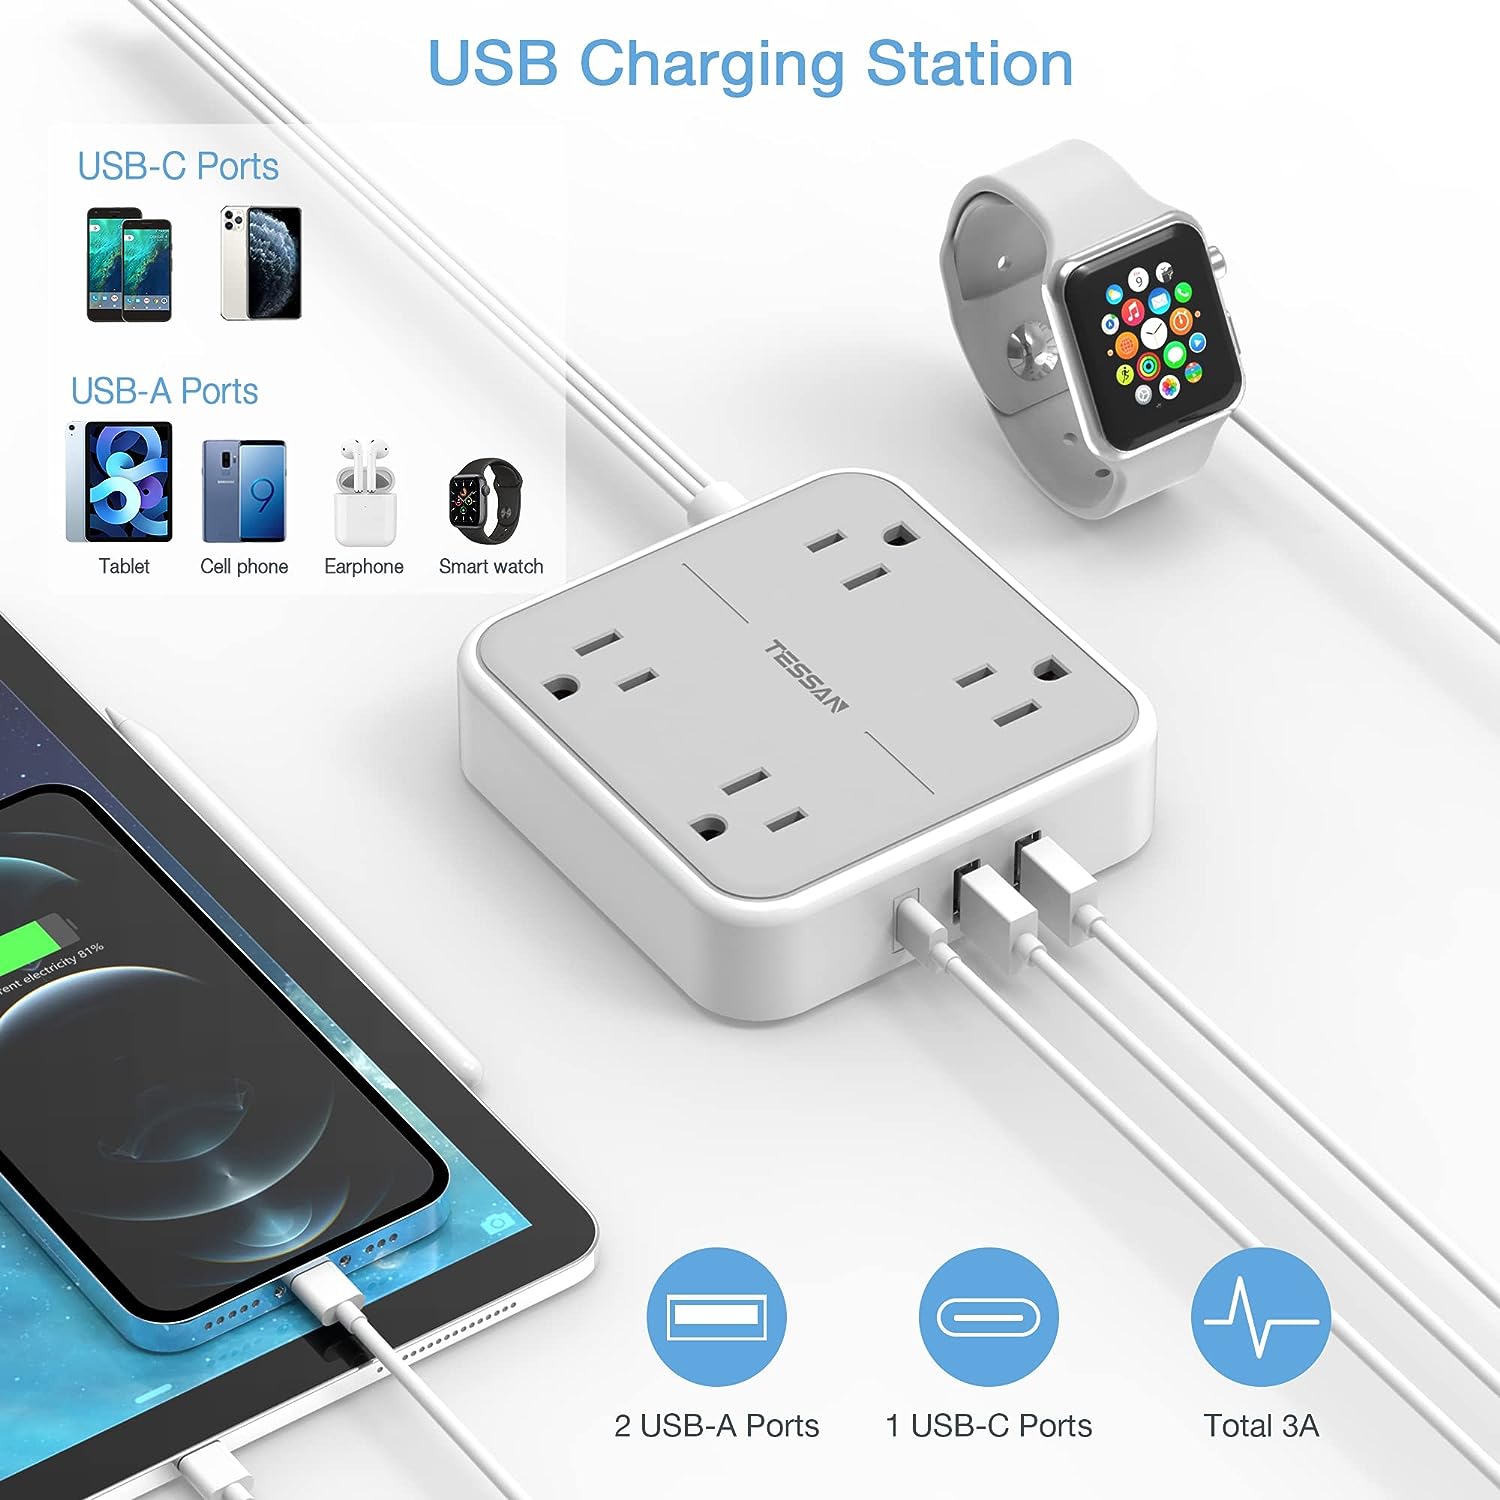 TESSAN 5 ft Ultra Thin Extension Cord with 3 USB Wall Charger(1 USB C Port)